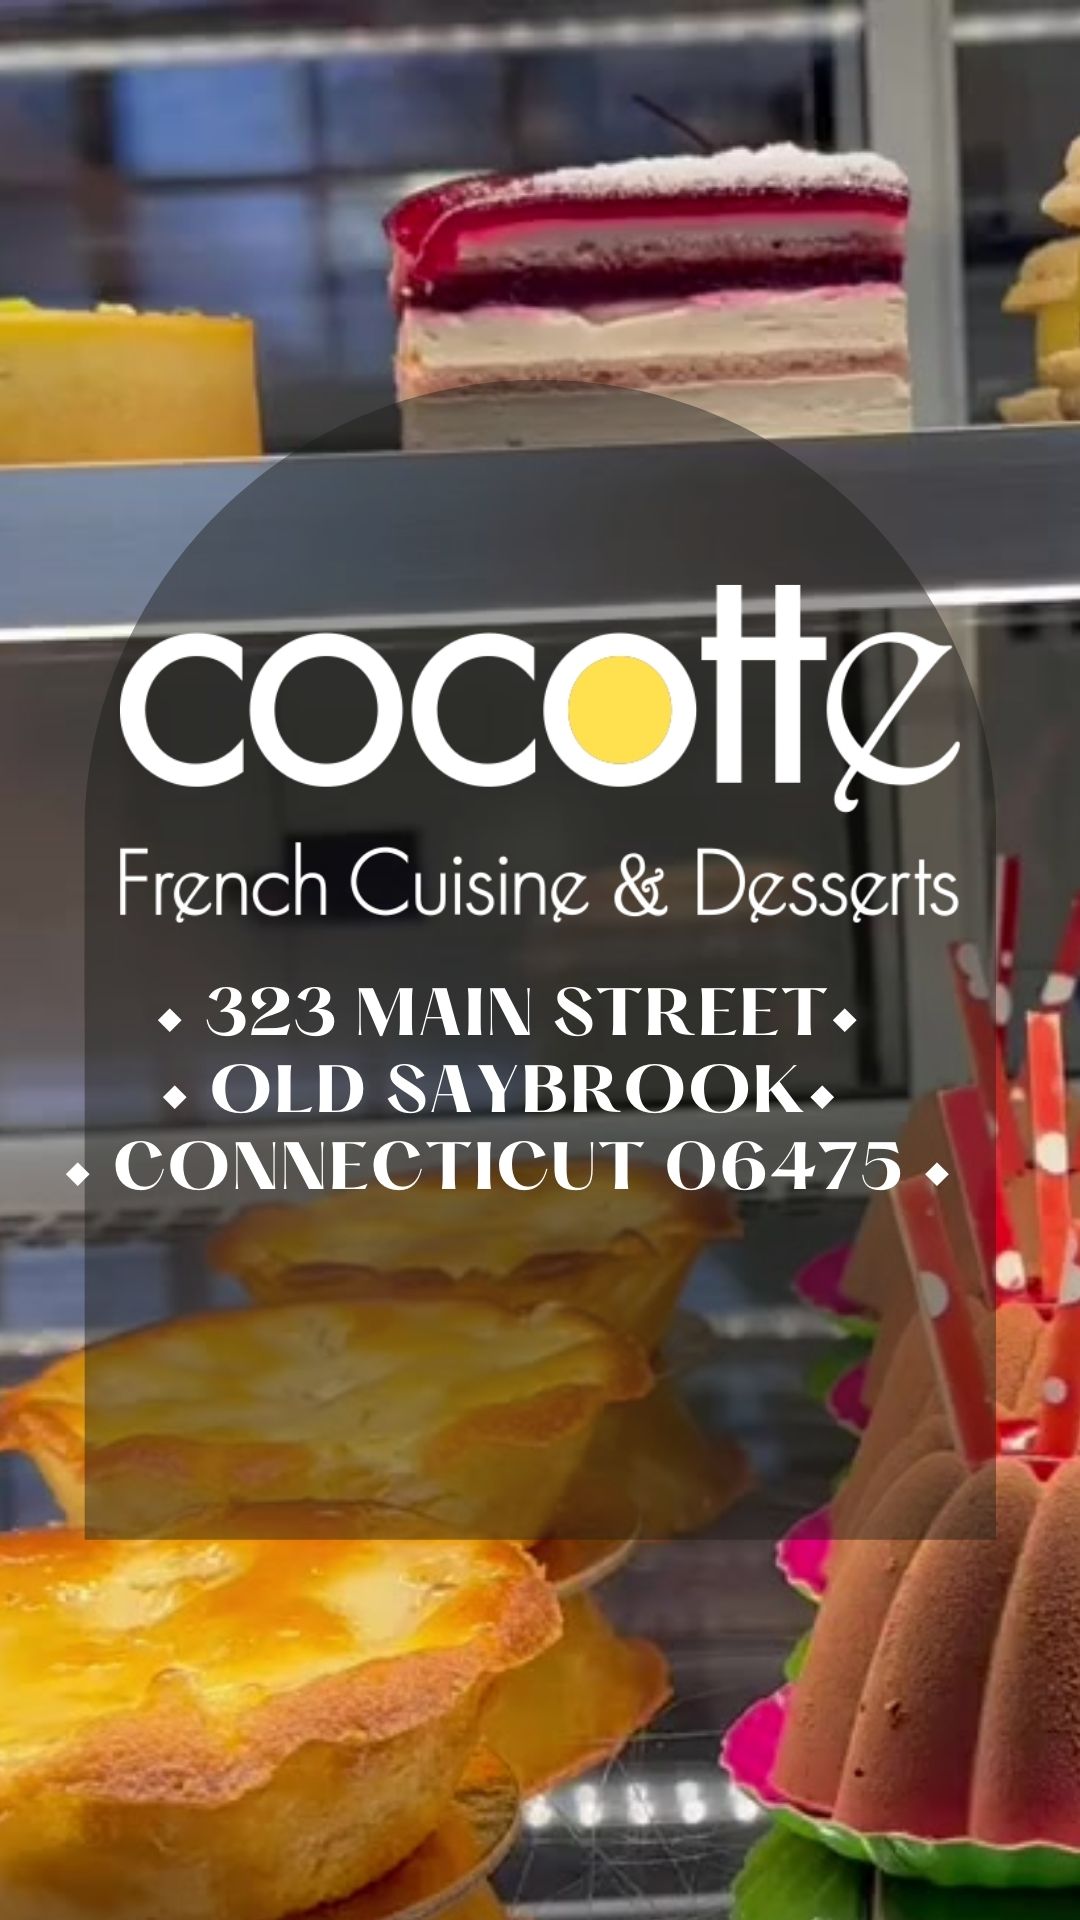 Member Monday: Cocotte at James Pharmacy